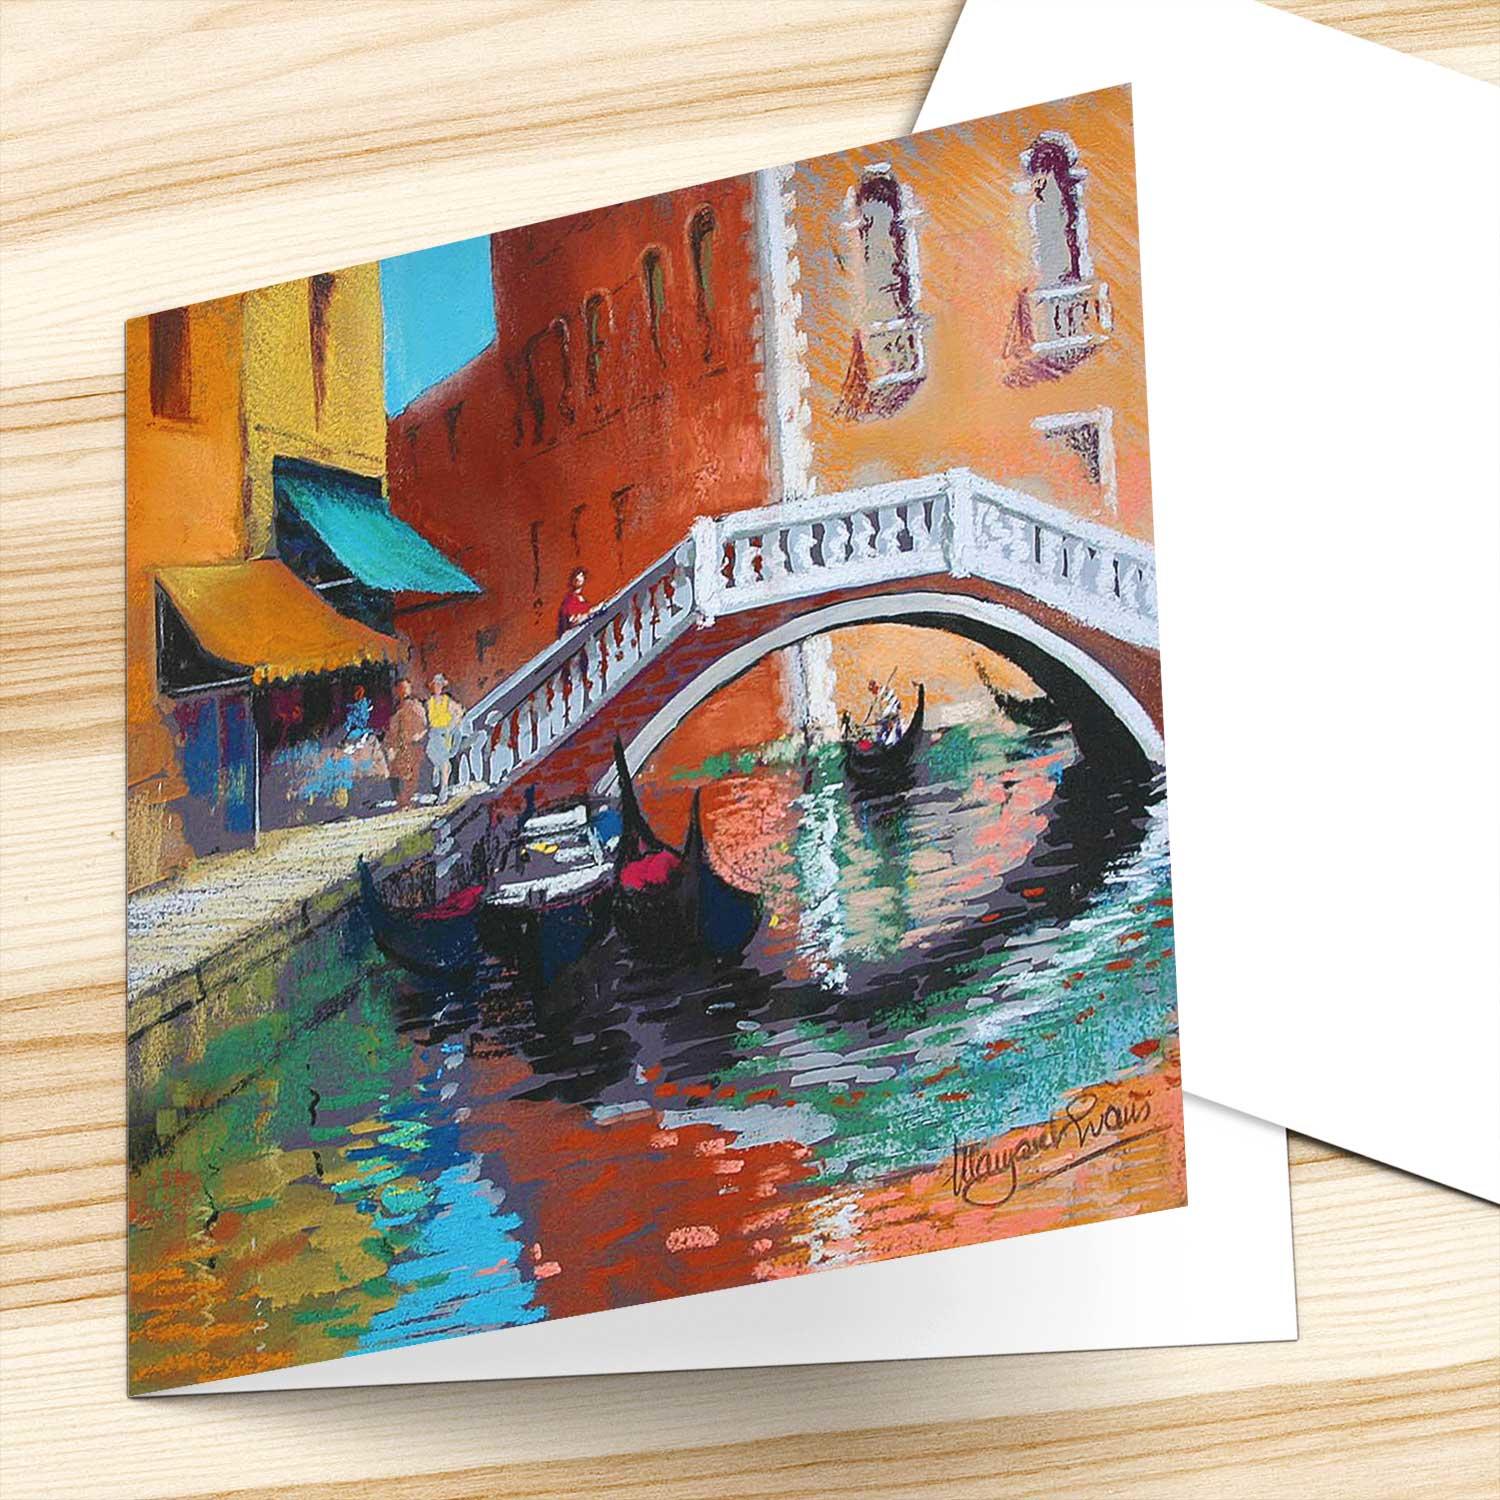 Sun Canopies, Venice Greeting Card from an original painting by artist Margaret Evans